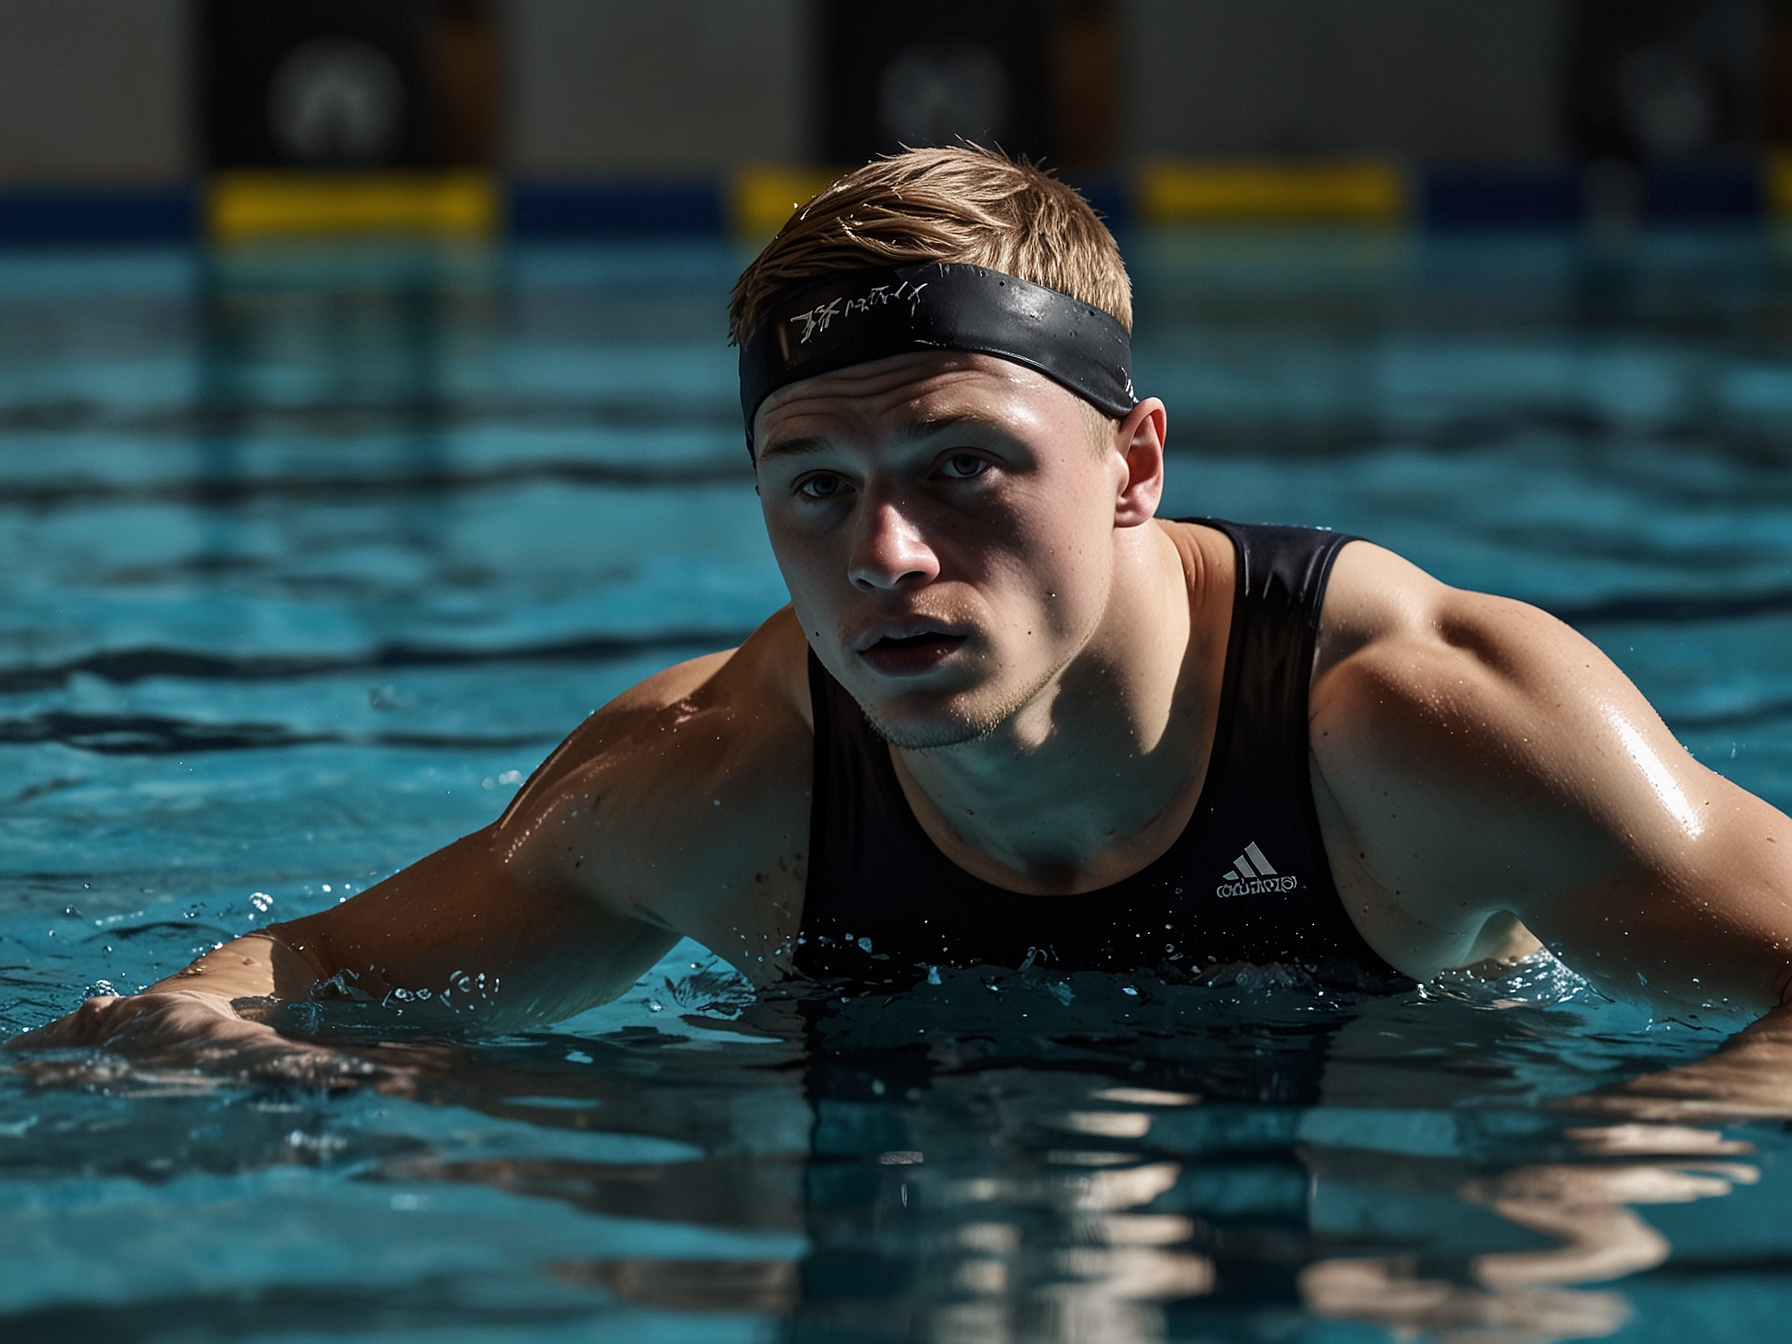 Adam Peaty during a swimming training session, highlighting his rigorous physical preparation balanced with a focus on mental and emotional well-being as he gears up for the Paris Olympics.